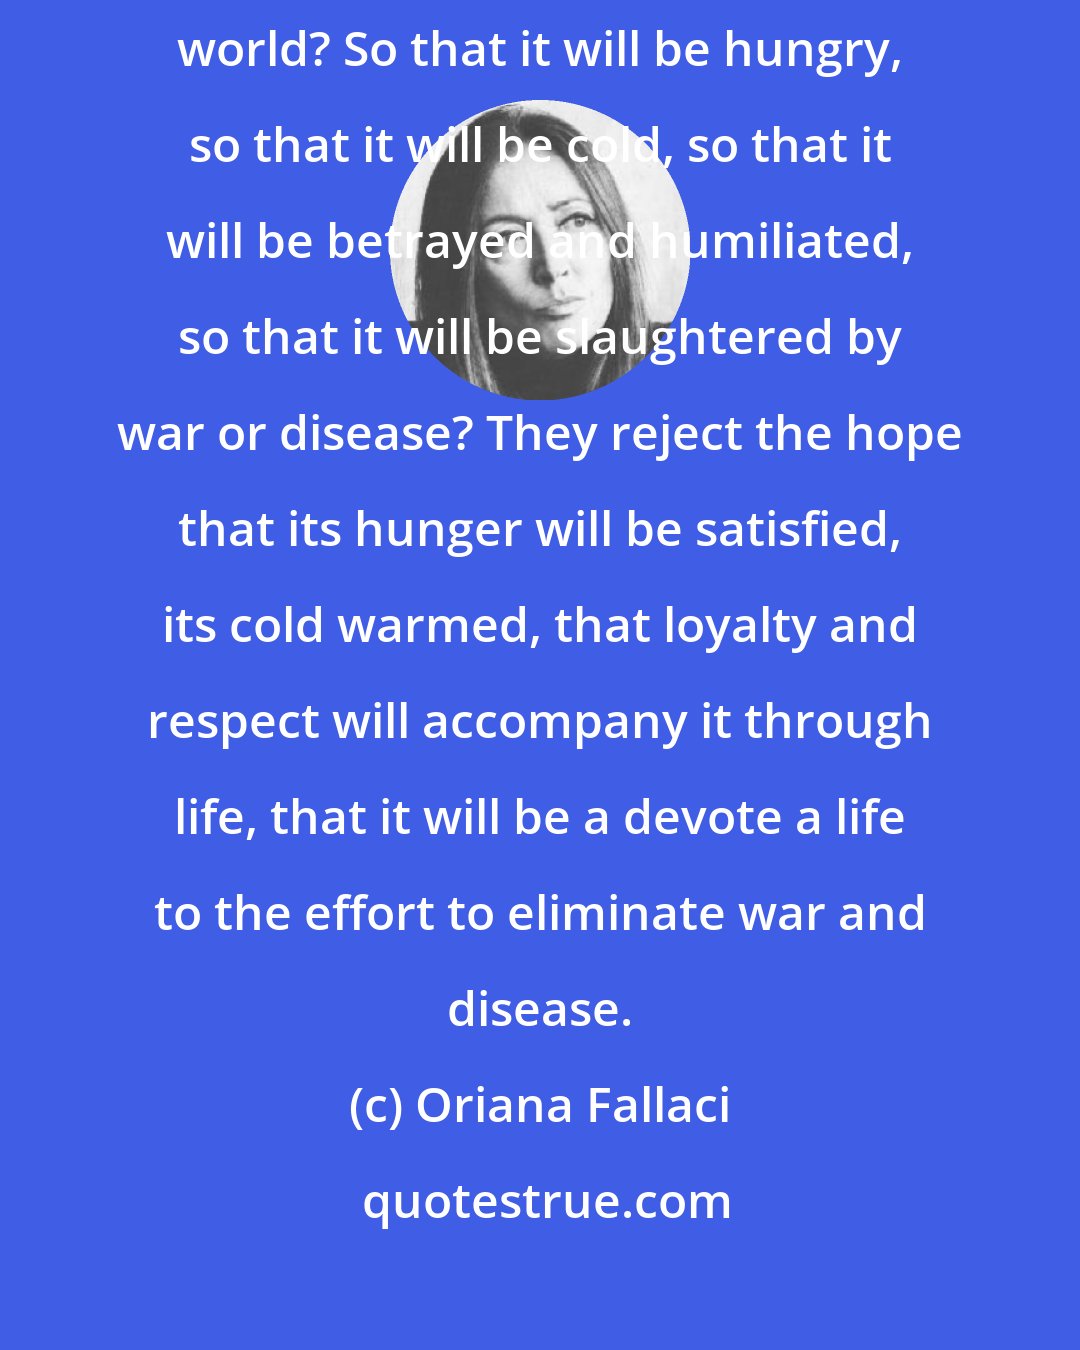 Oriana Fallaci: A lot of women ask themselves why they should bring a child into the world? So that it will be hungry, so that it will be cold, so that it will be betrayed and humiliated, so that it will be slaughtered by war or disease? They reject the hope that its hunger will be satisfied, its cold warmed, that loyalty and respect will accompany it through life, that it will be a devote a life to the effort to eliminate war and disease.